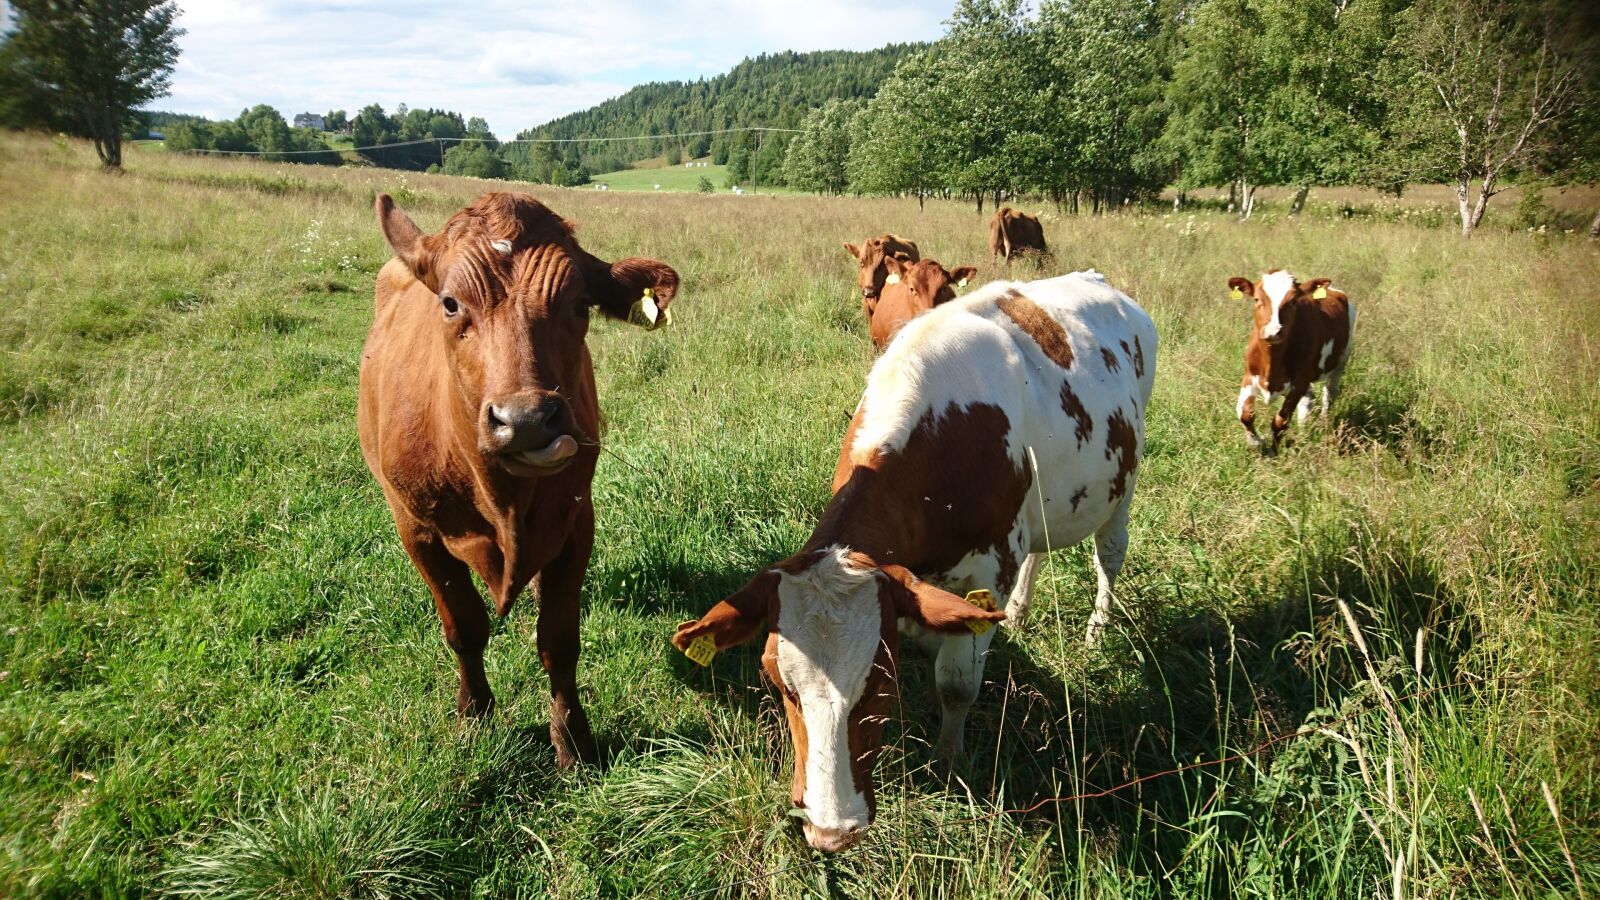 Sony Xperia Z5 Compact sample photo. Cows, sweden, what a photography